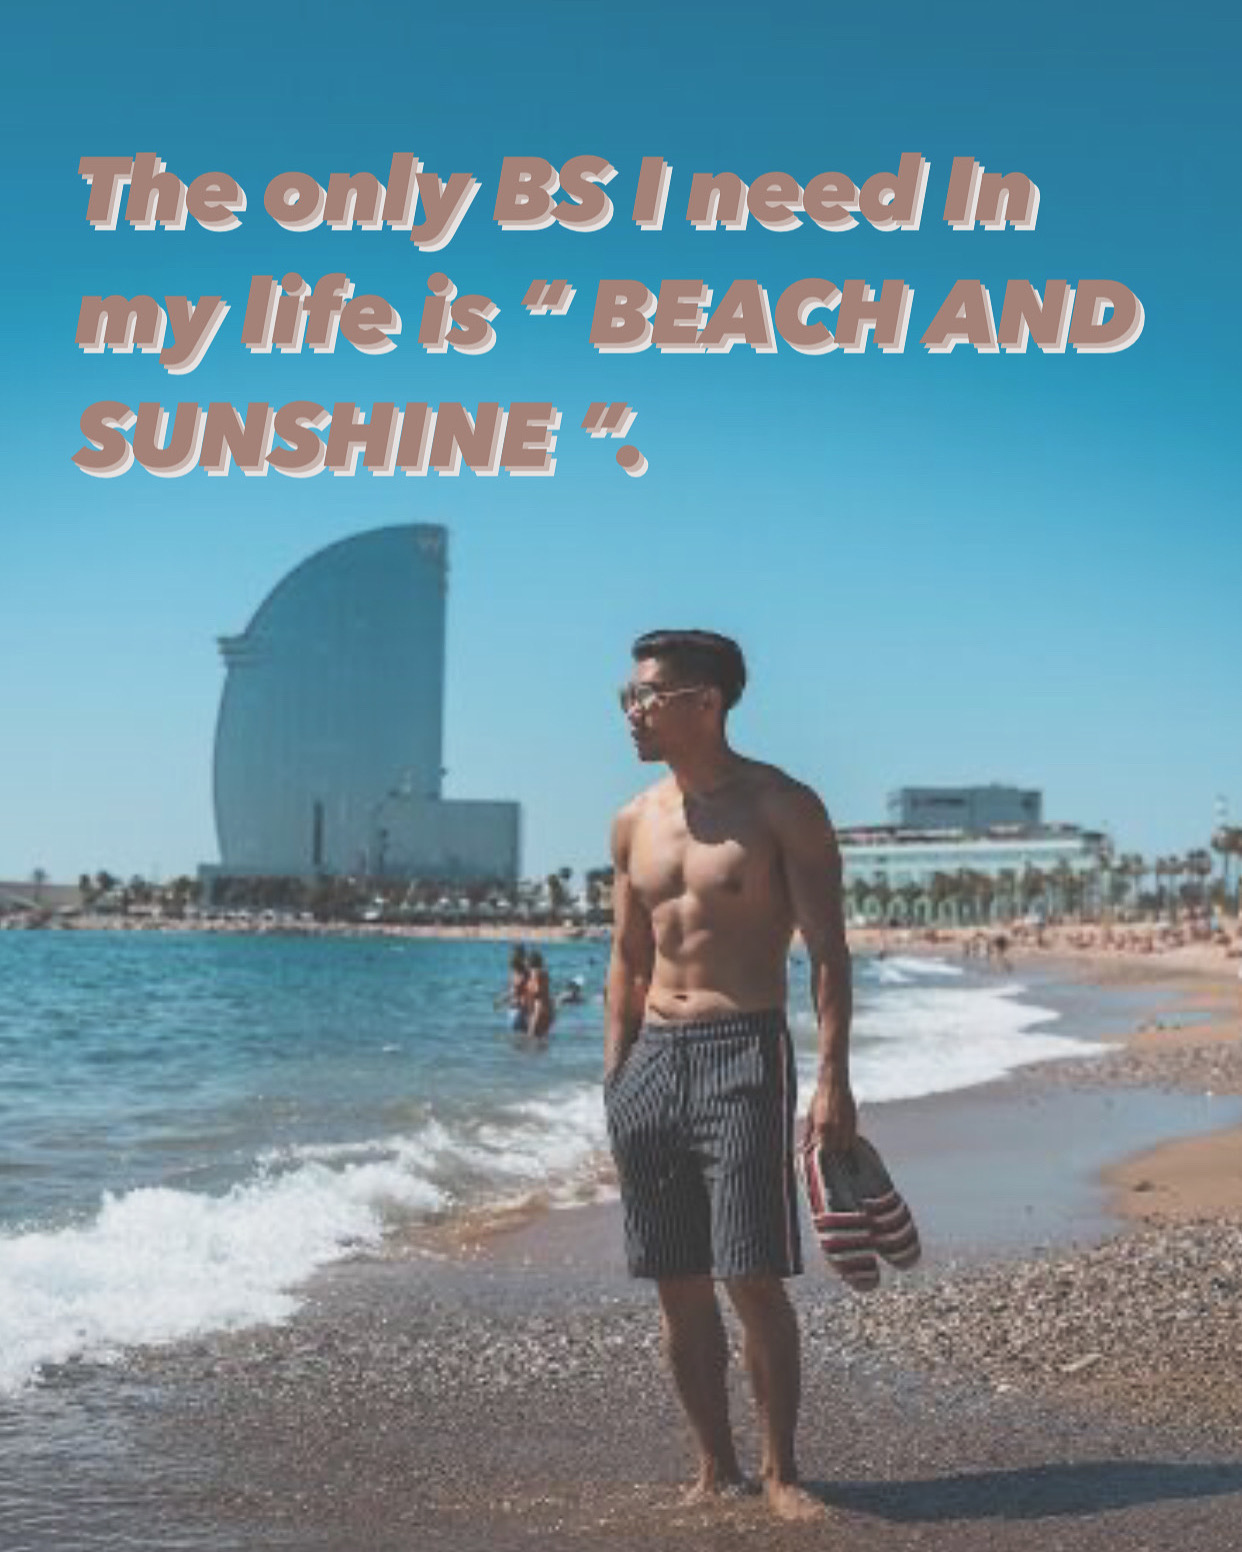 Top 250+ Beach Instagram Cool Quotes captions